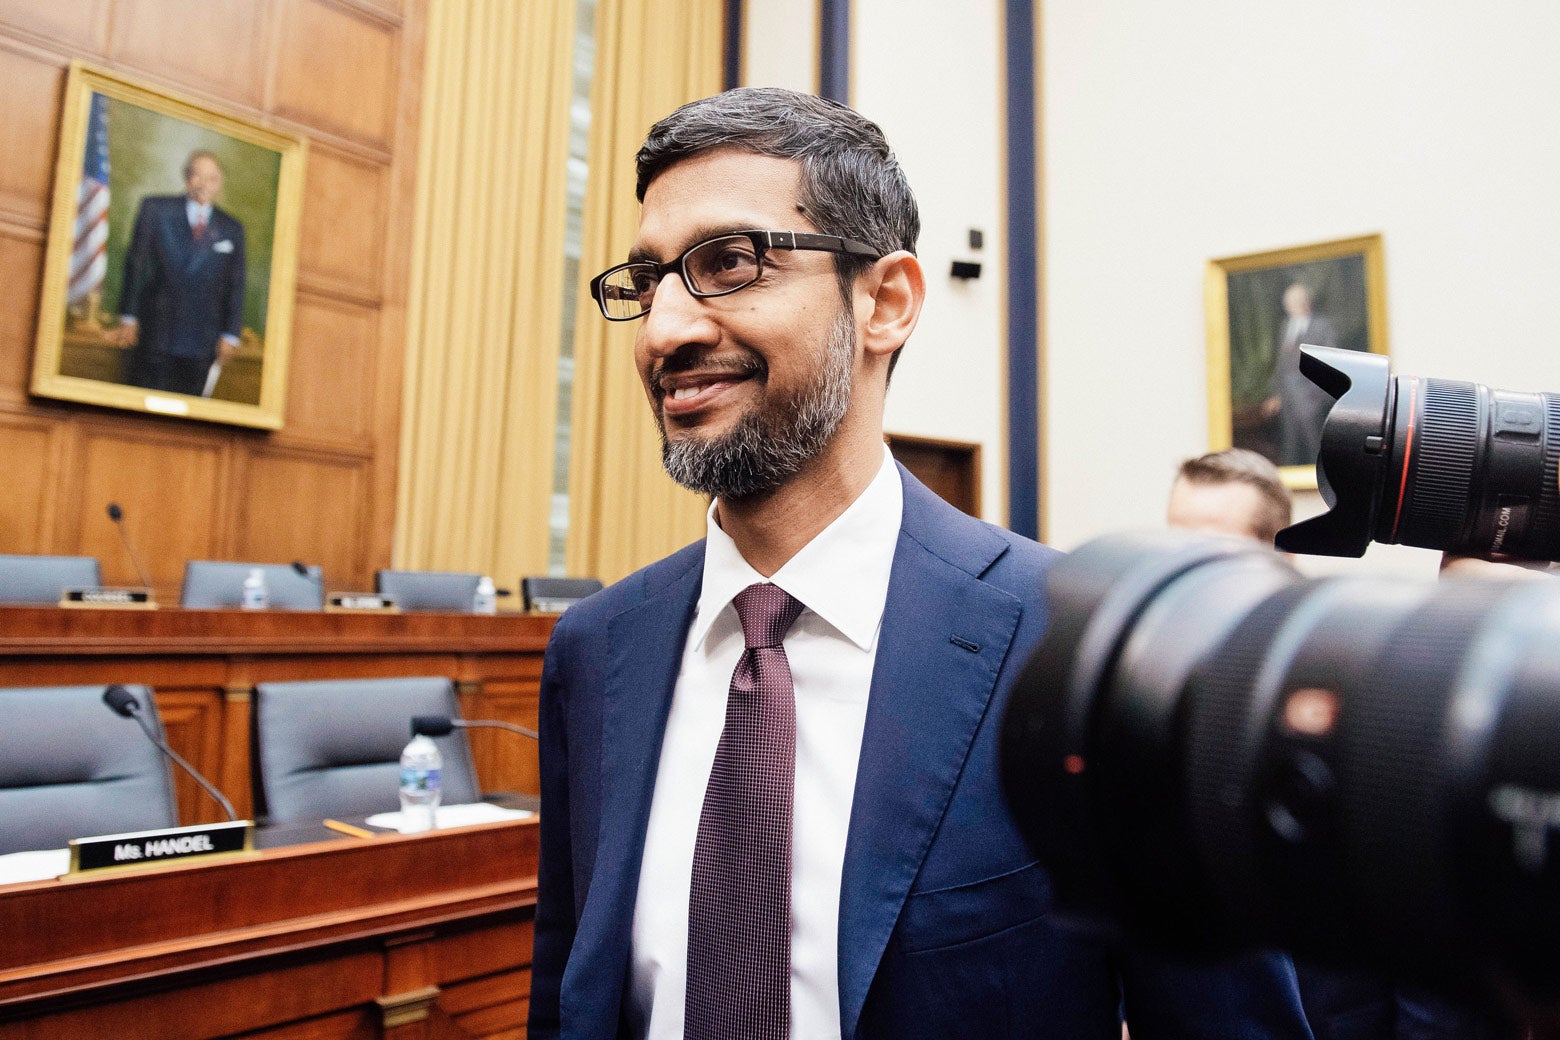 Google CEO Sundar Pichai smiles in profile for the press cameras as he arrives to testify during a House Judiciary Committee hearing in Washington on Tuesday.